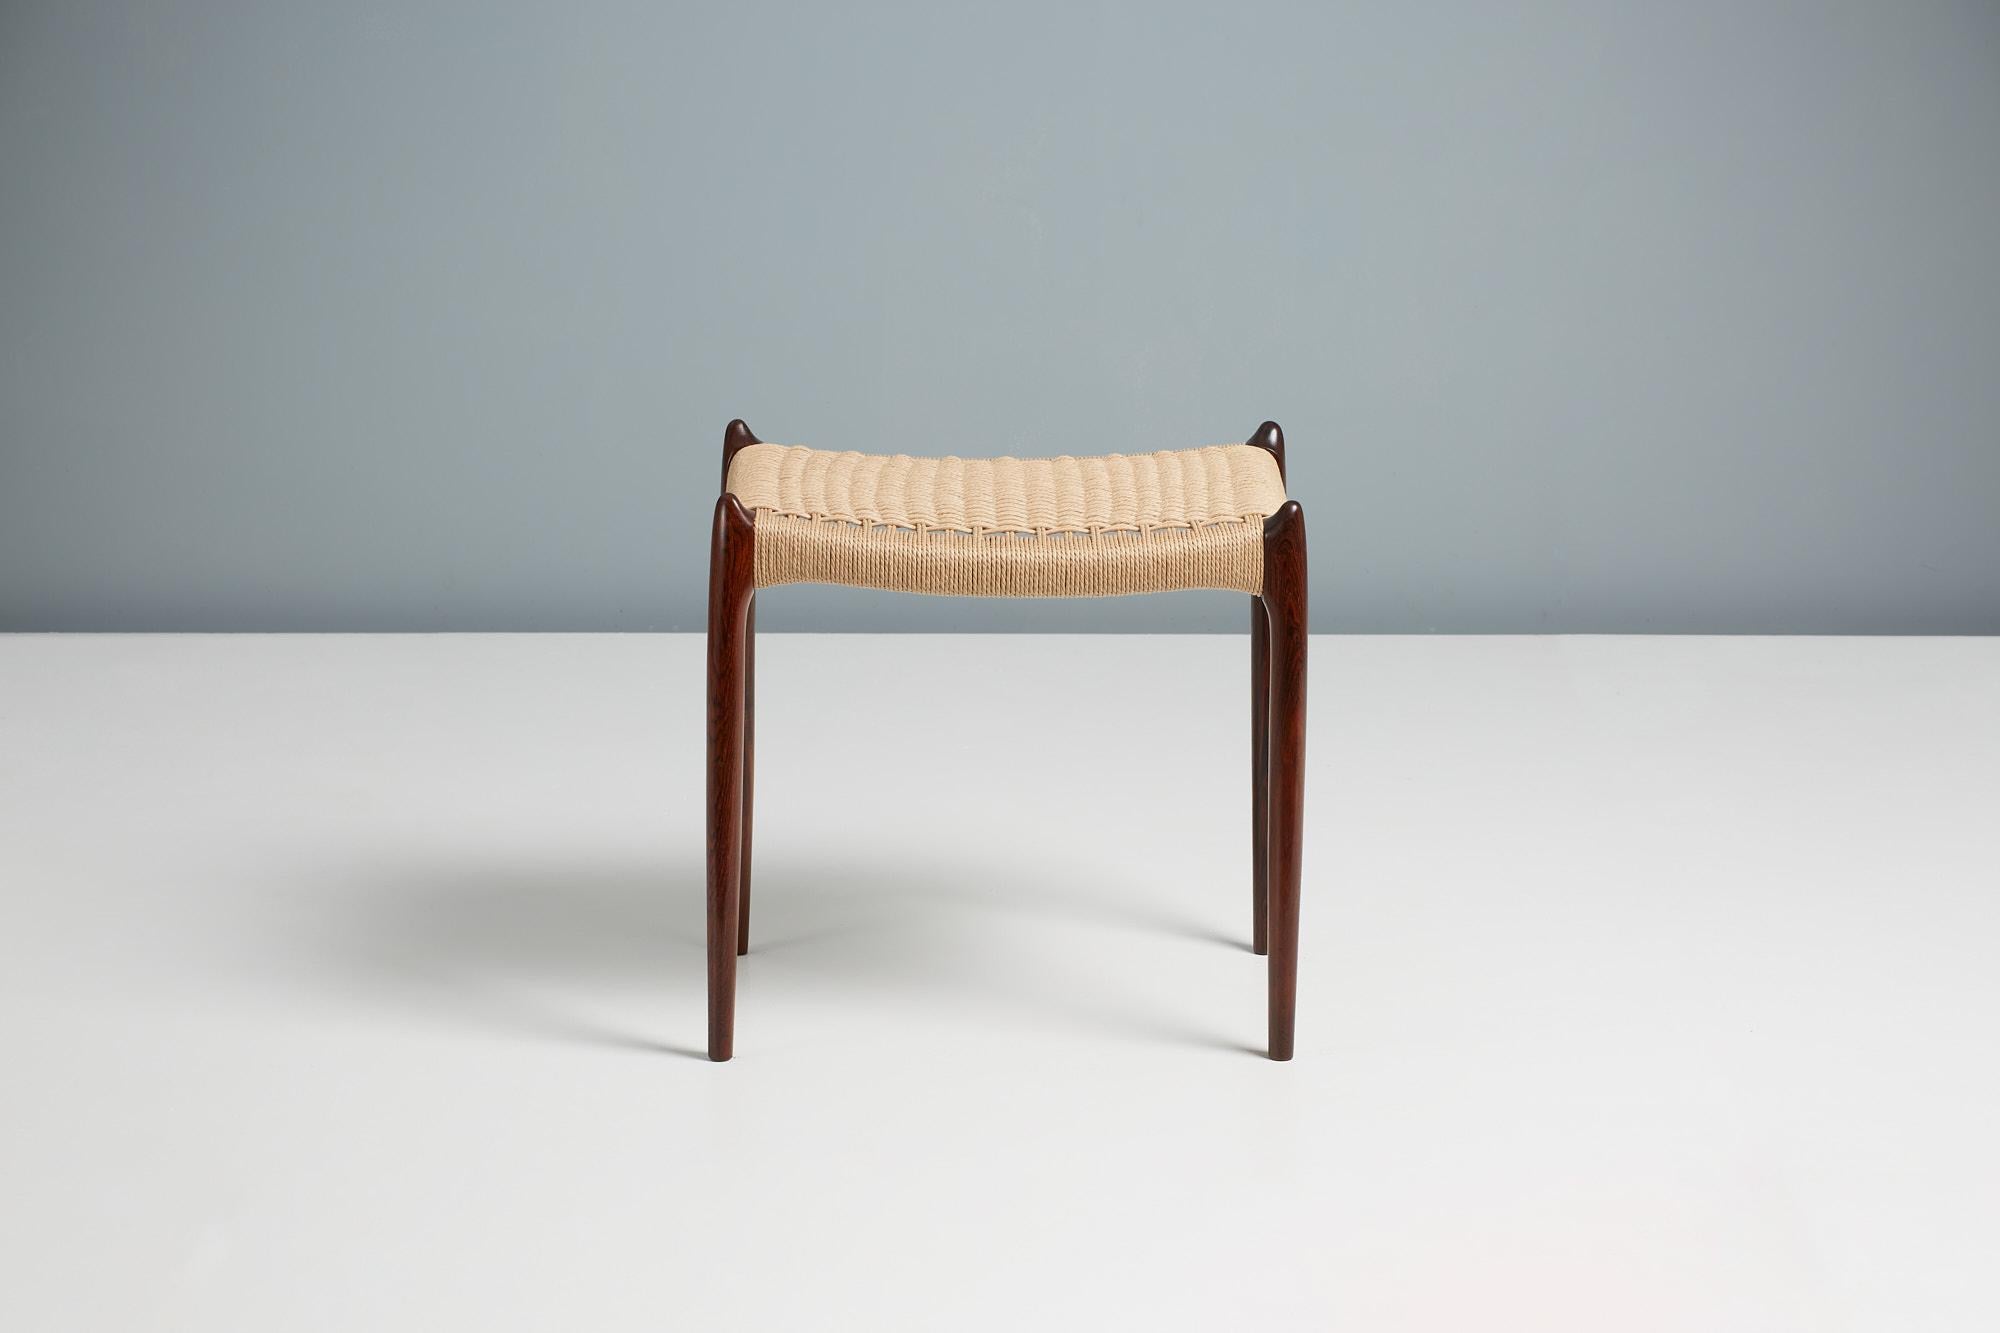 Niels O. Moller - Model 78a stool

Solid rosewood stool designed by Niels O. Moller and produced by his own company J.L Moller Mobelfabrik. The rosewood frame has been refinished and the seat is newly woven papercord.



